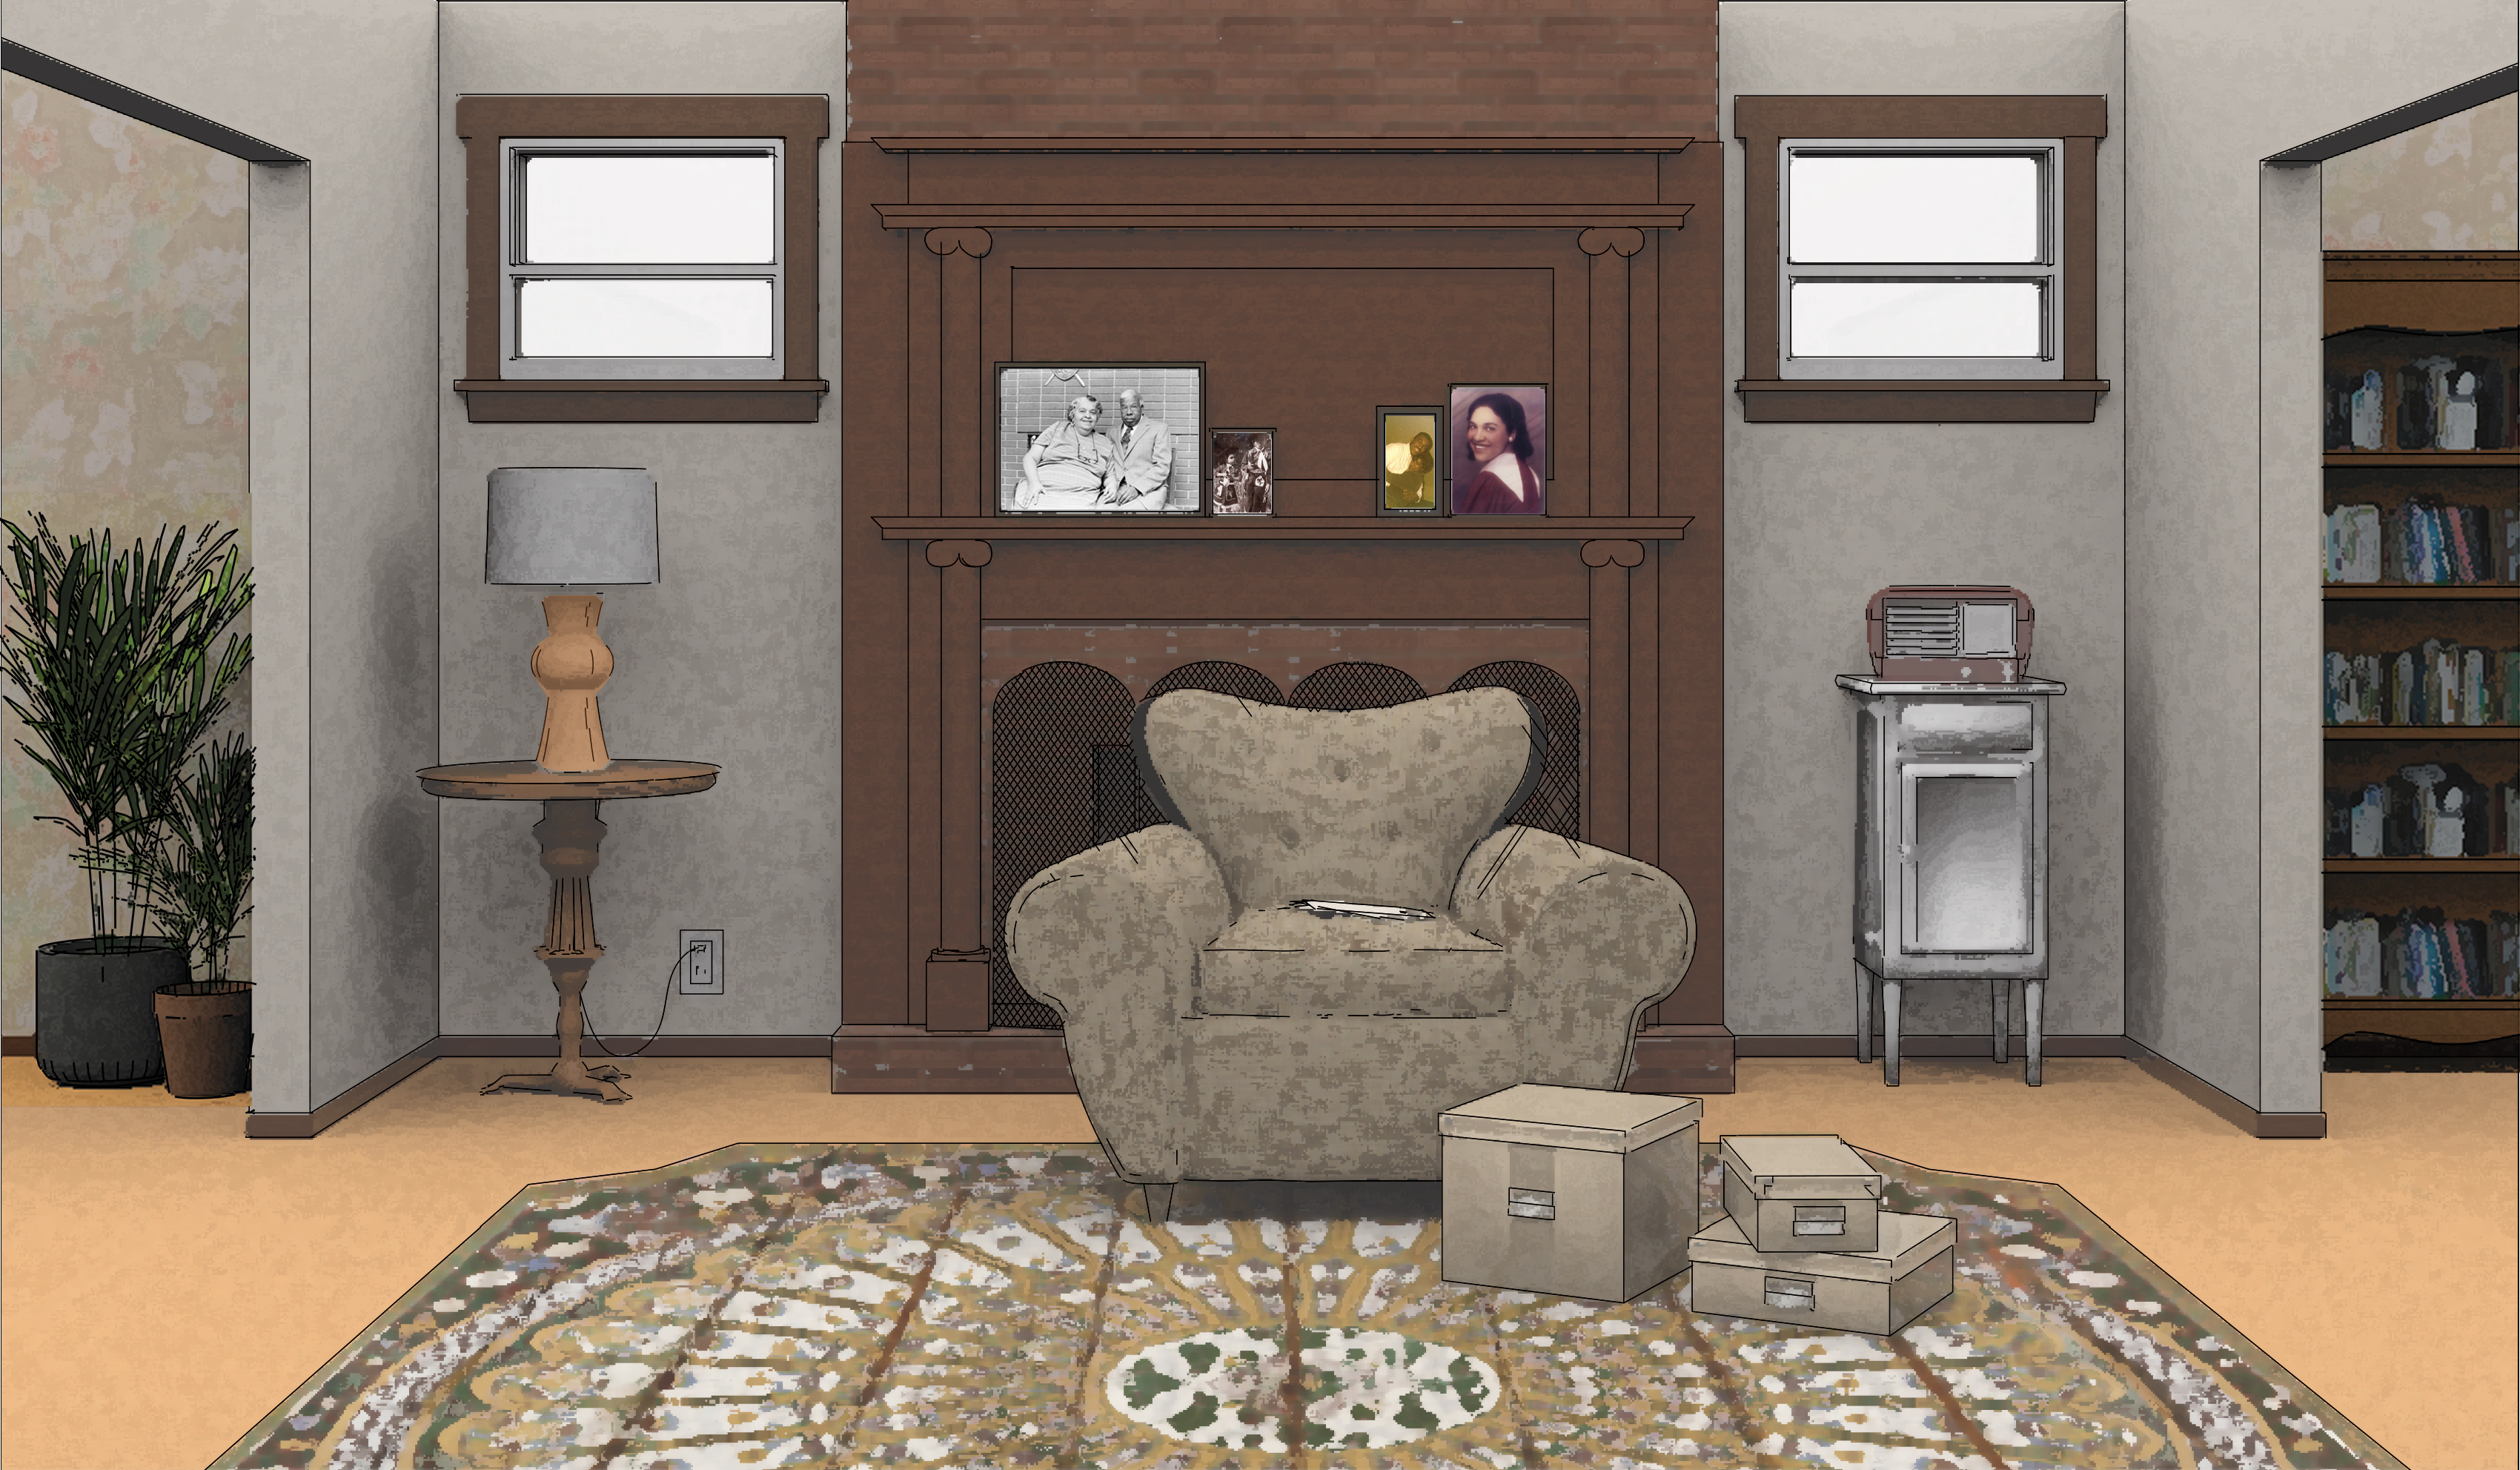 A decorative image of a living room, containing furniture, photos on the mantel, boxes of archives, and a radio